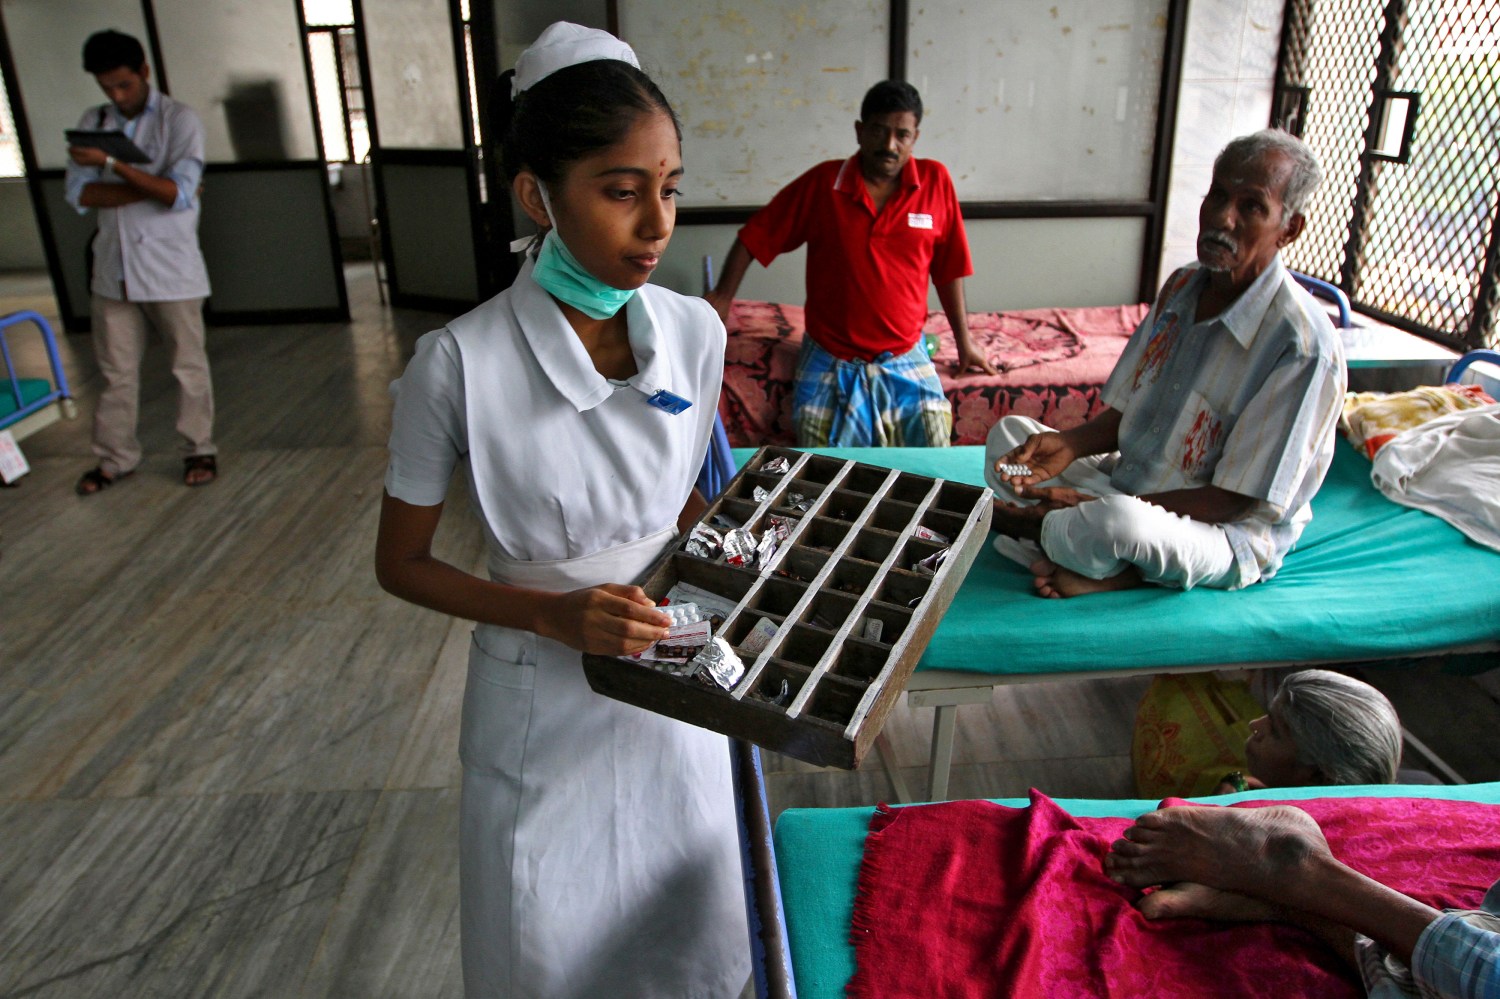 A paramedic distributes free medicine provided by the government to patients inside a ward at Rajiv Gandhi Government General Hospital (RGGGH) in Chennai July 12, 2012. Chennai is the capital of Tamil Nadu, one of two Indian states offering free medicine for all. The state provides a glimpse of the hurdles India faces as it embarks on a programme to extend free drug coverage nationwide. Picture taken July 12, 2012. To match Analysis INDIA-DRUGS/             REUTERS/Babu (INDIA - Tags: HEALTH SOCIETY DRUGS) - GM1E87N0HMY01